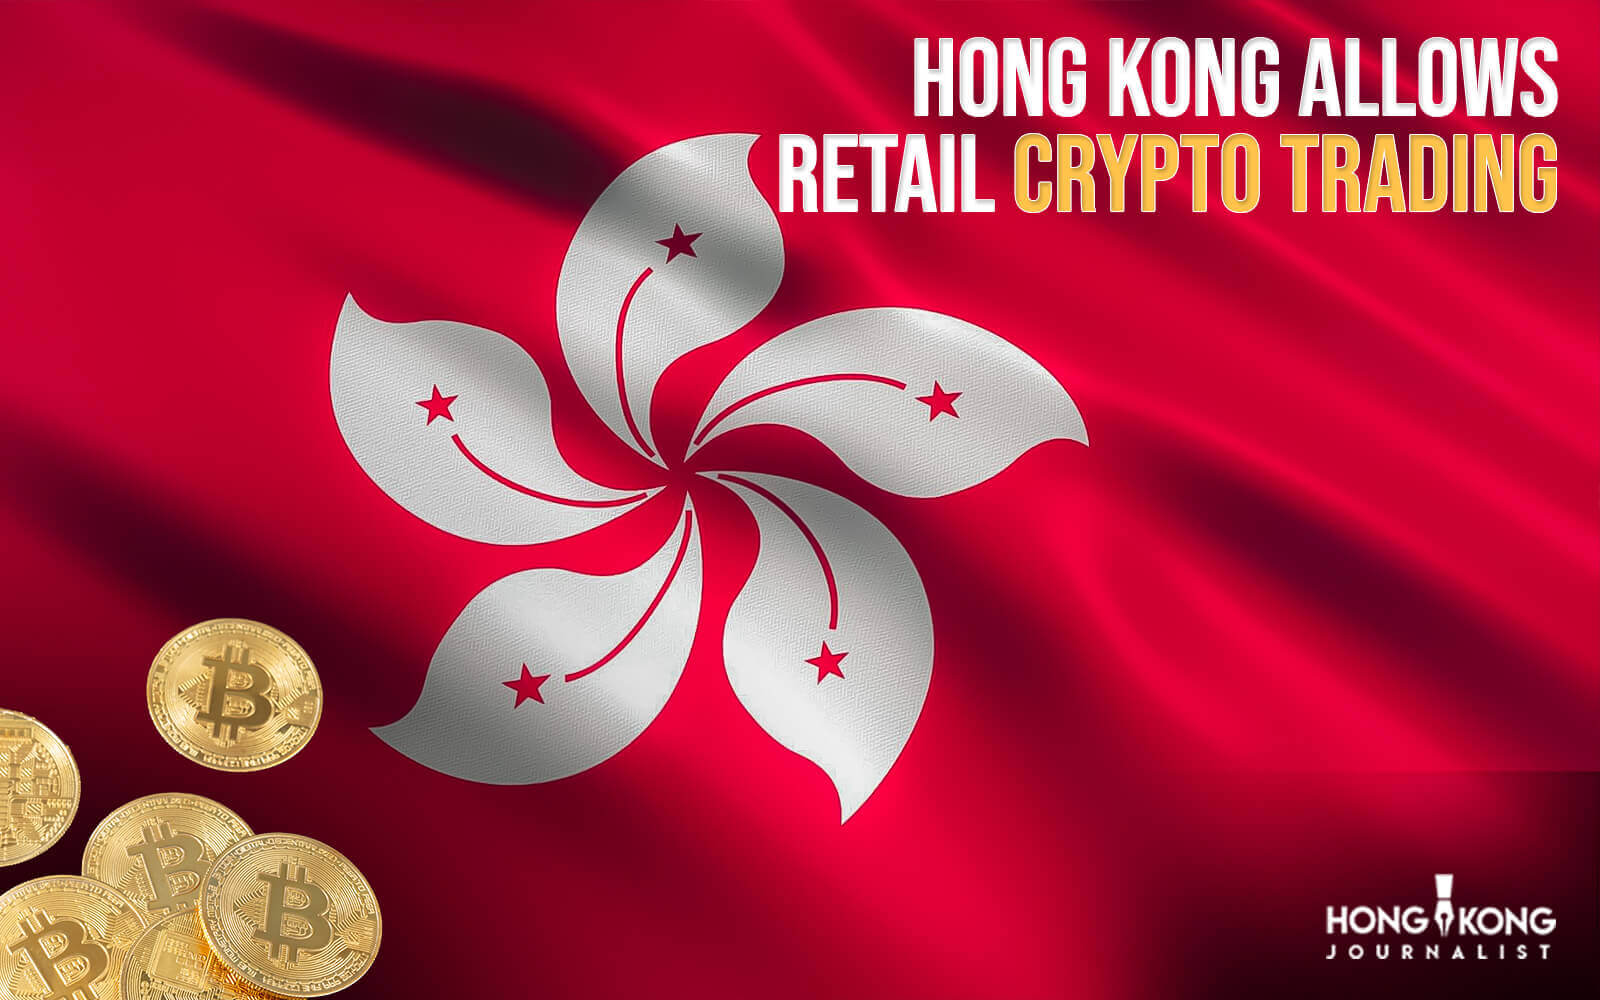 Hong Kong Allows Retail Crypto Trading and Issues First Licences to HashKey and OSL